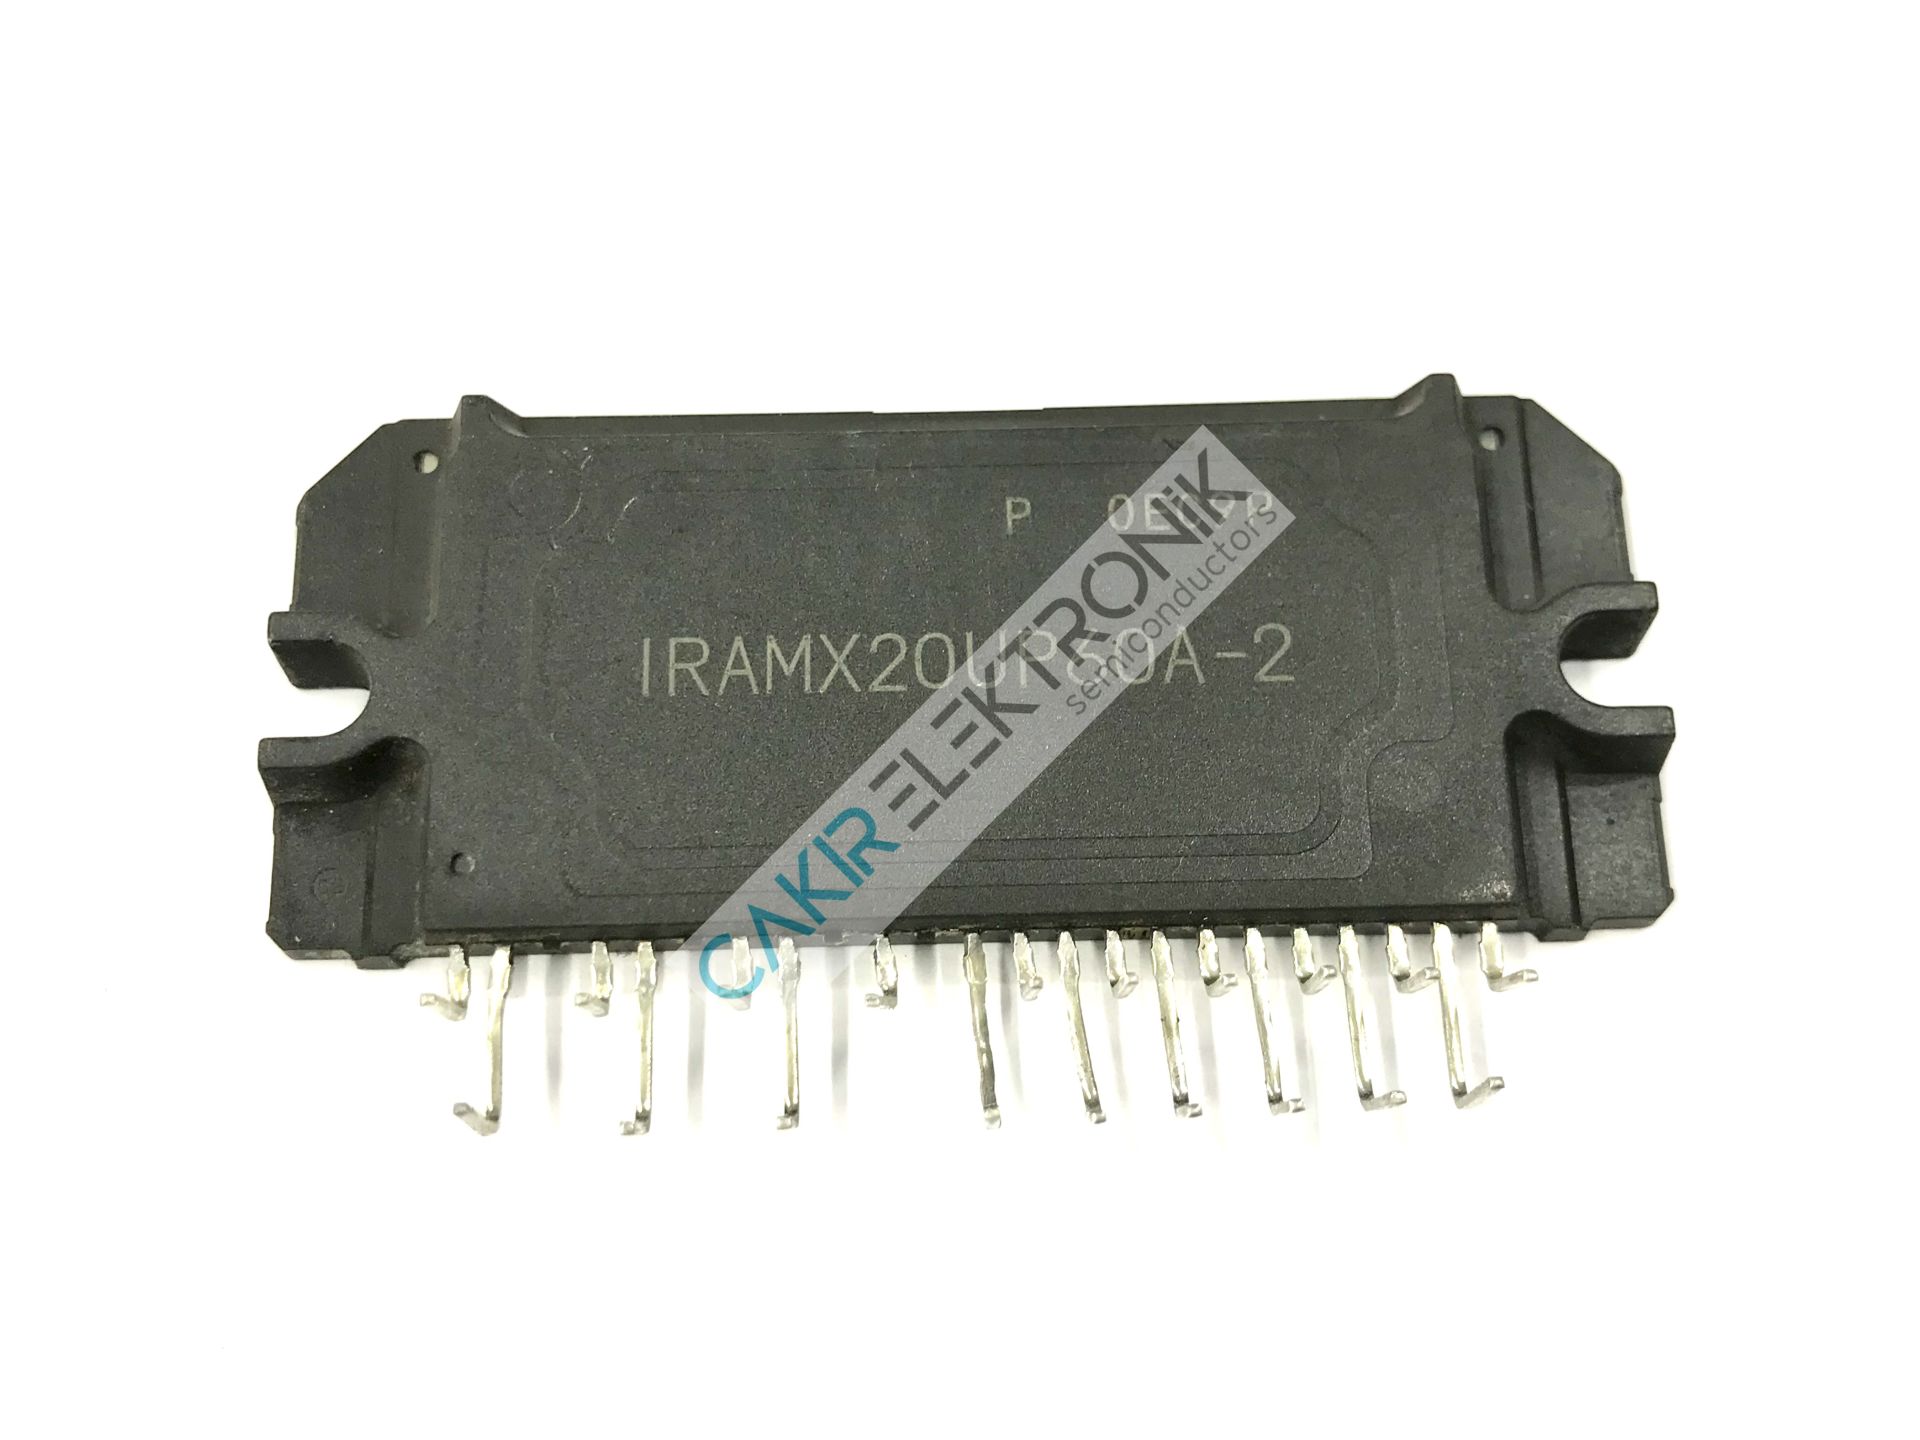 IRAMX20UP60A-2 , Motor/Motion/Ignition Controllers & Drivers PLUG N DRIVE MOD iMOTION 16A, 600V